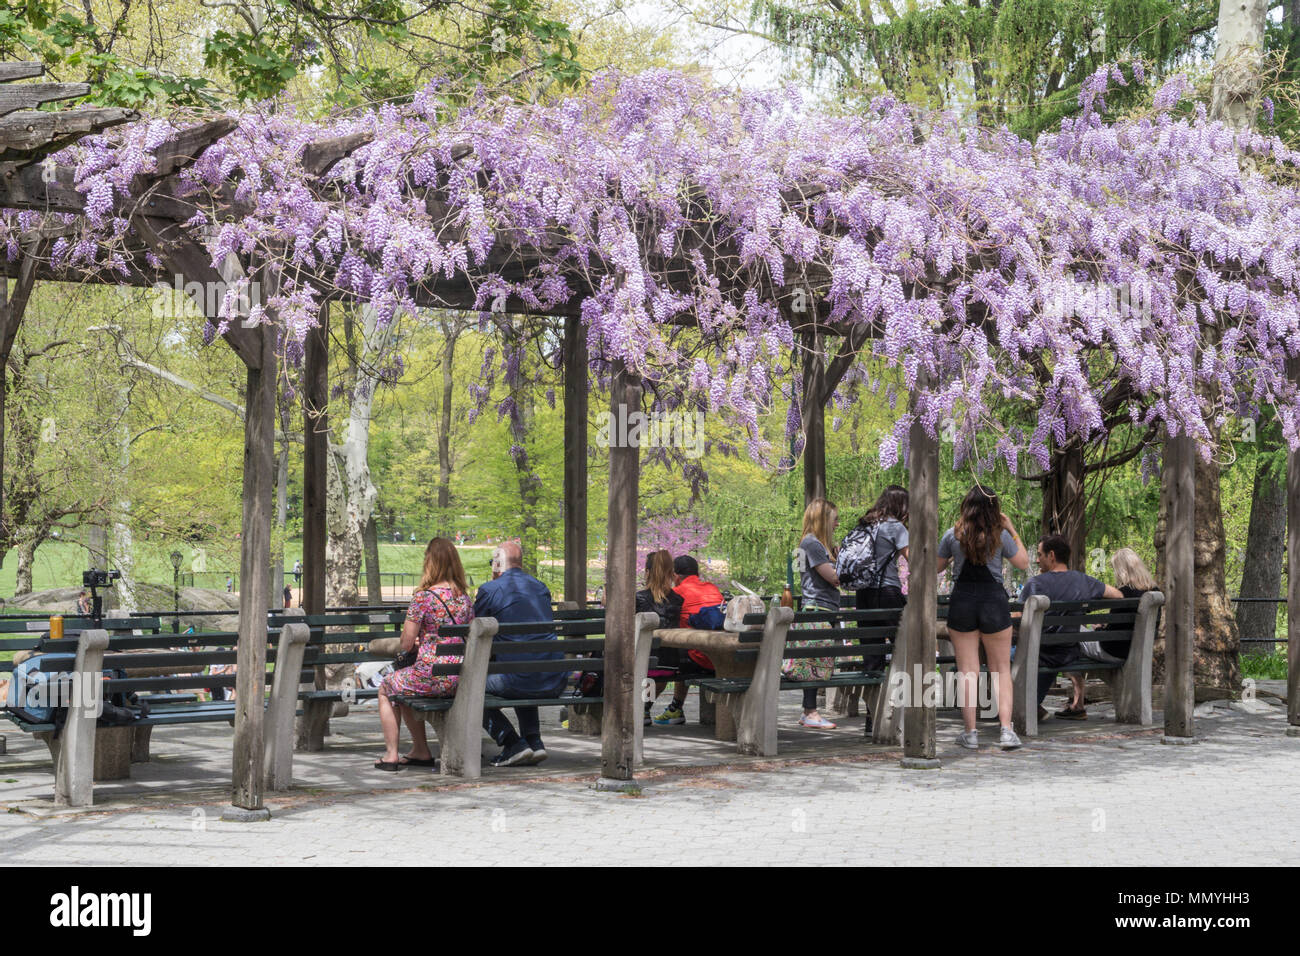 Chess & Checkers House with Blooming Wisteria, Central Park, NYC Stock Photo